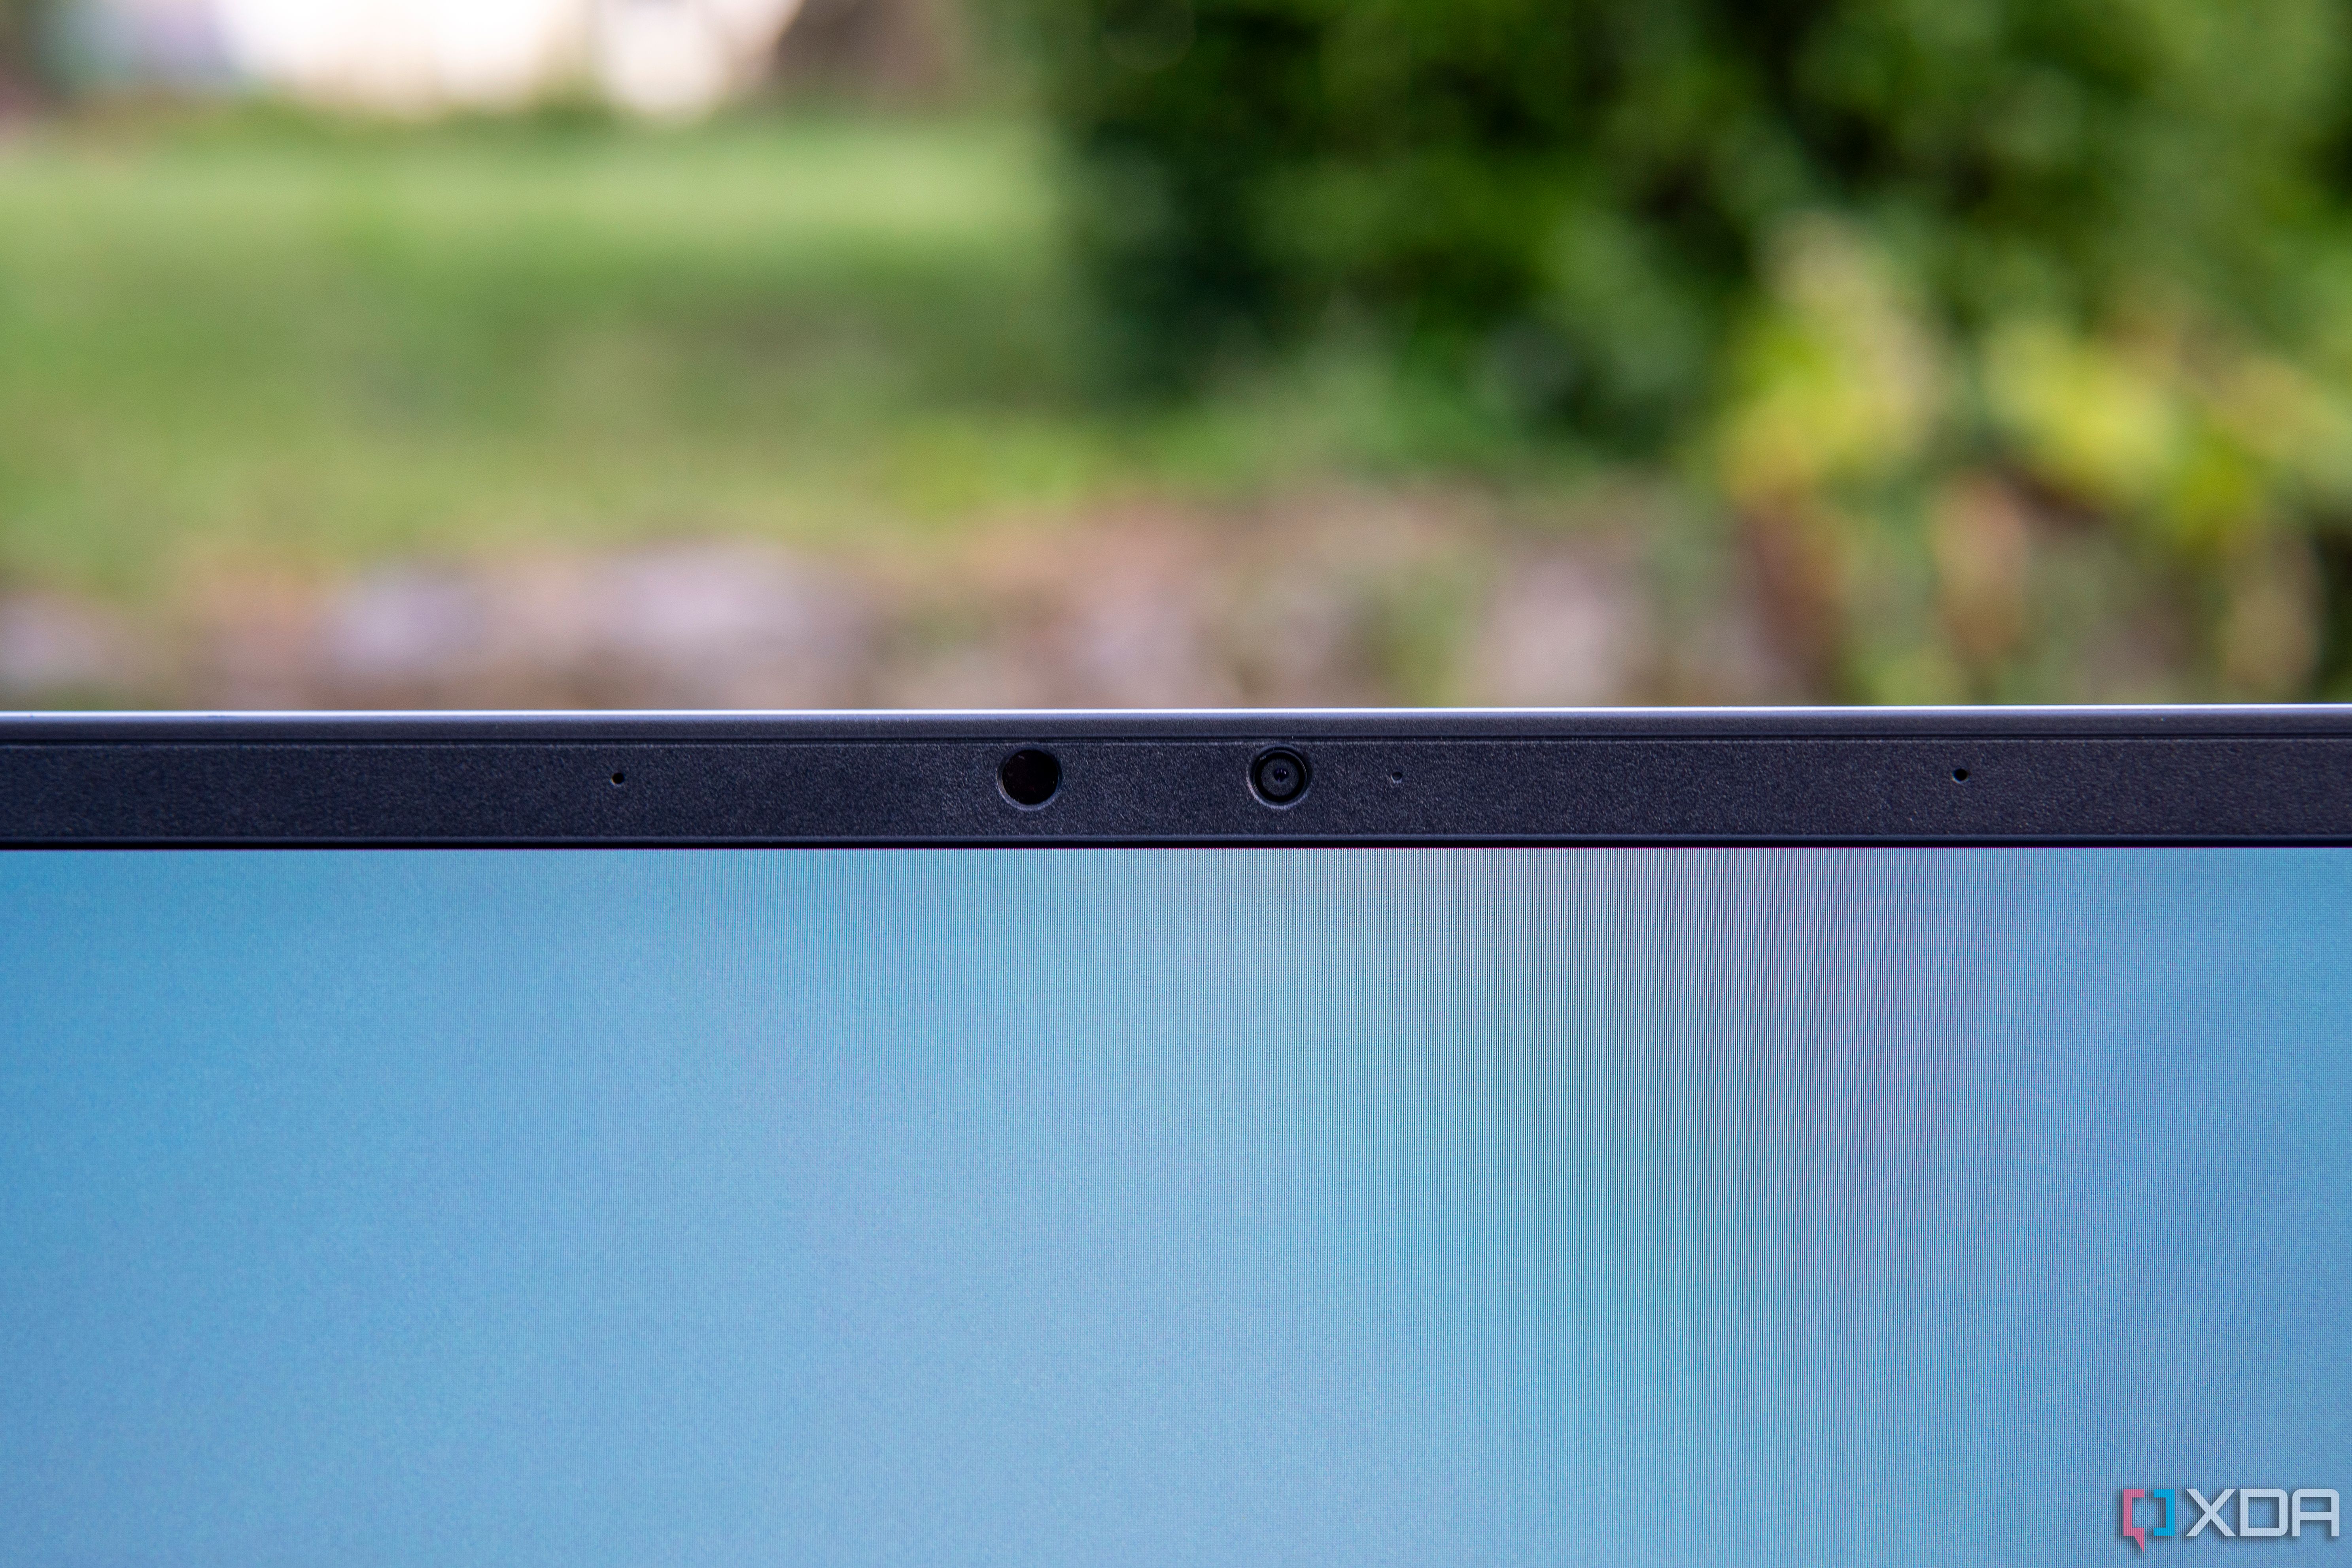 Close-up view of the LG Gram Style's webcam including an IR sensor used for Windows Hello